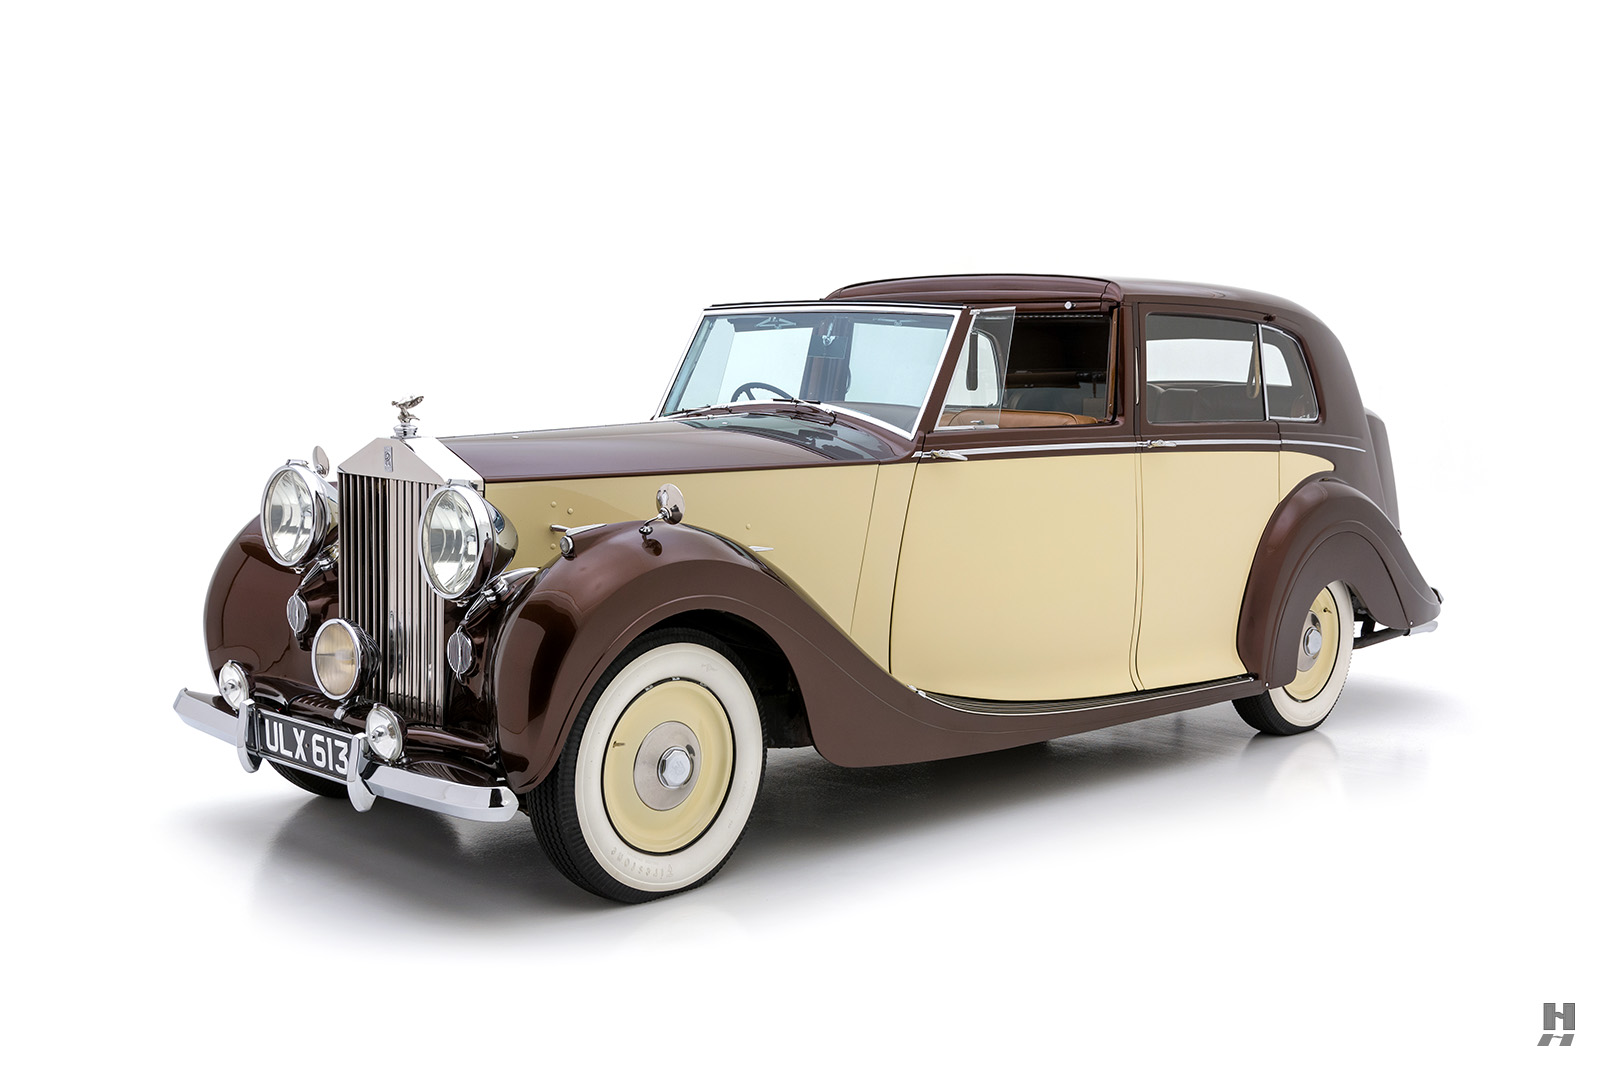 1959 Rolls-Royce Silver Wraith Coachbuilt | Hagerty Valuation Tools